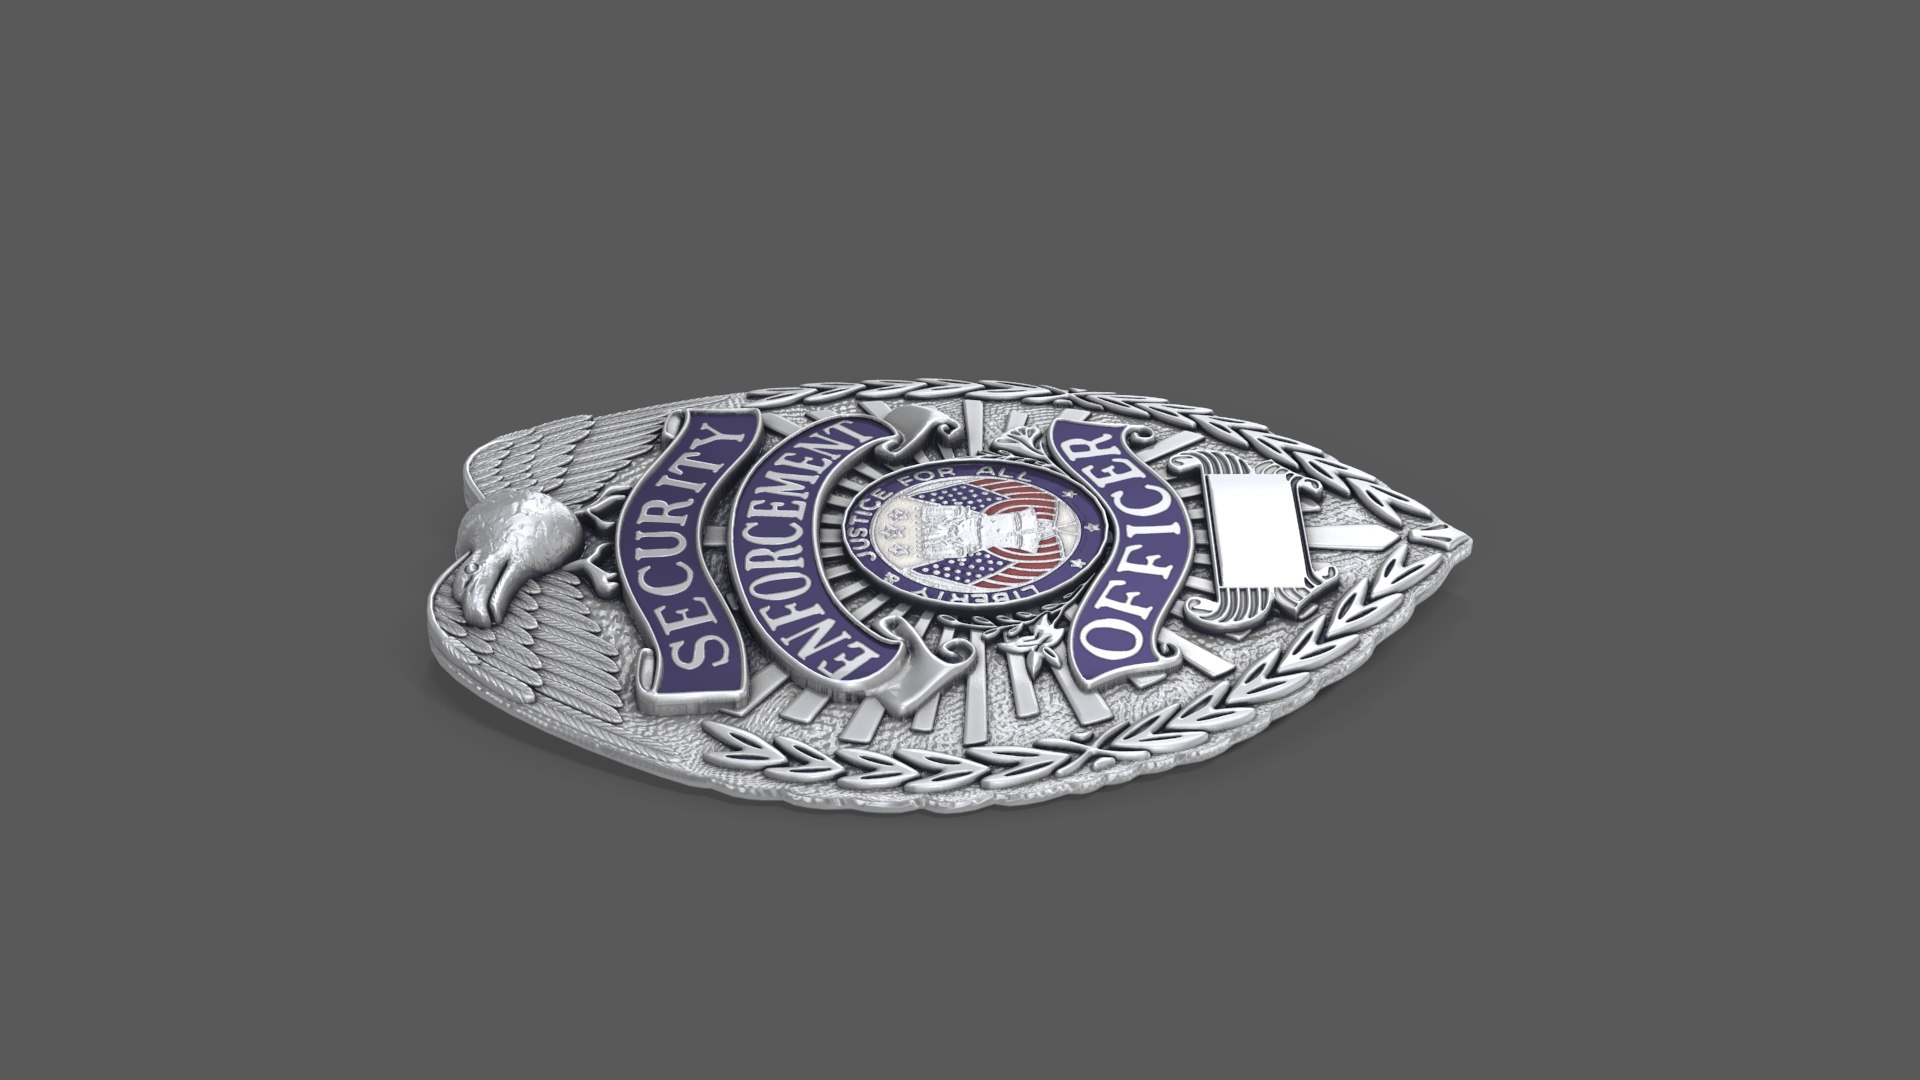 23,650 Security Officer Badge Images, Stock Photos, 3D objects